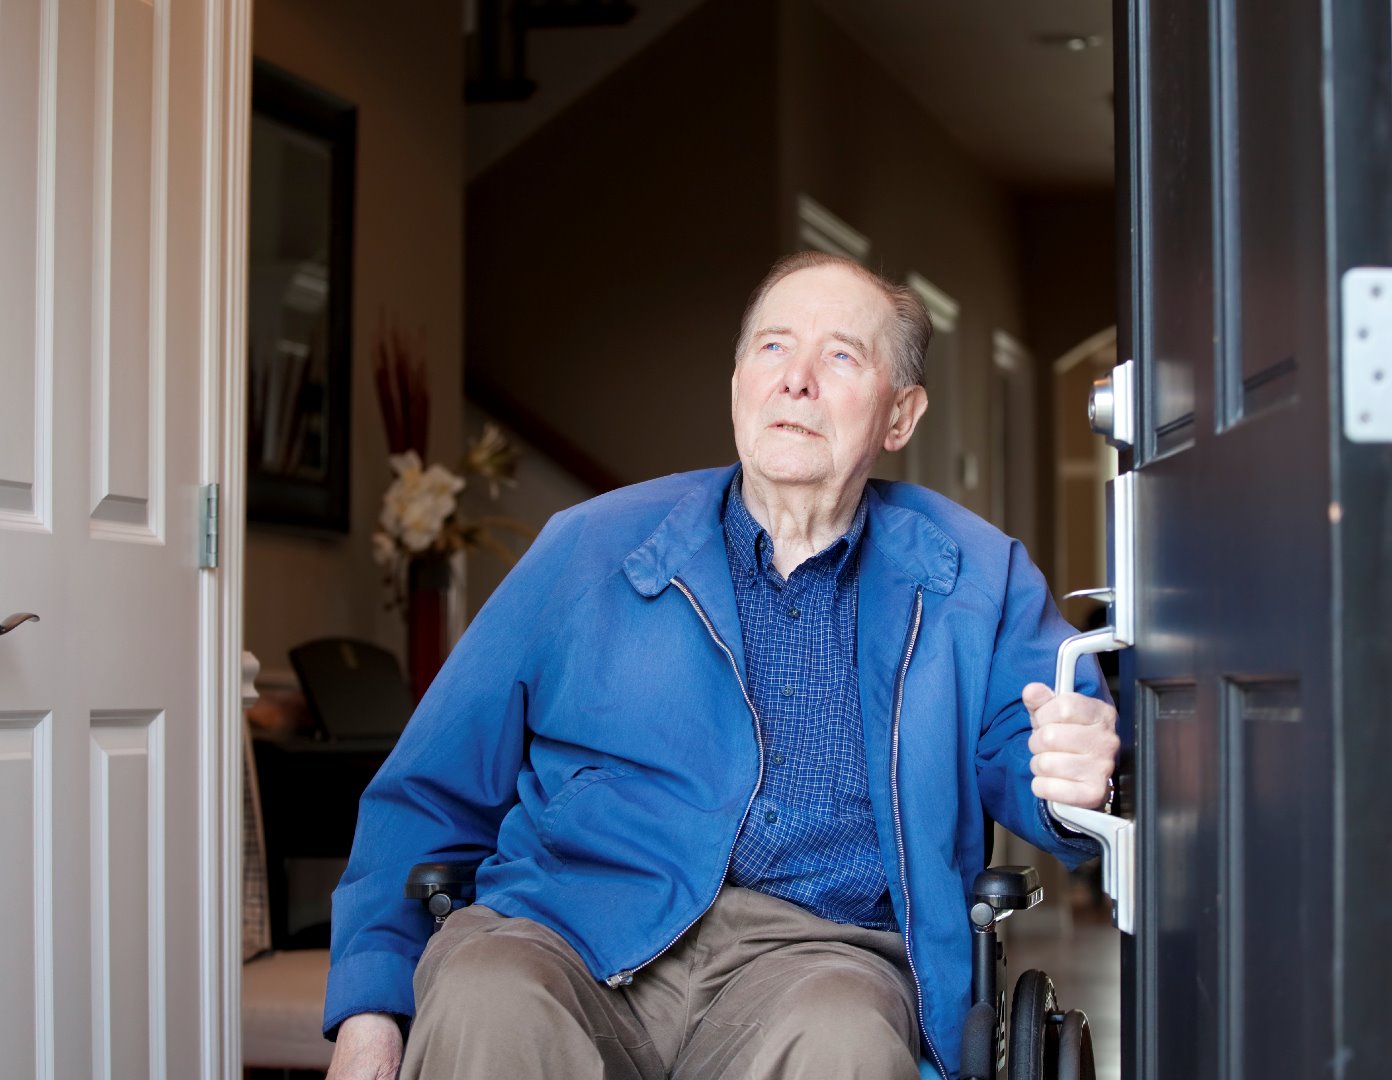 PIC - Older man in a doorway with a wheelchair